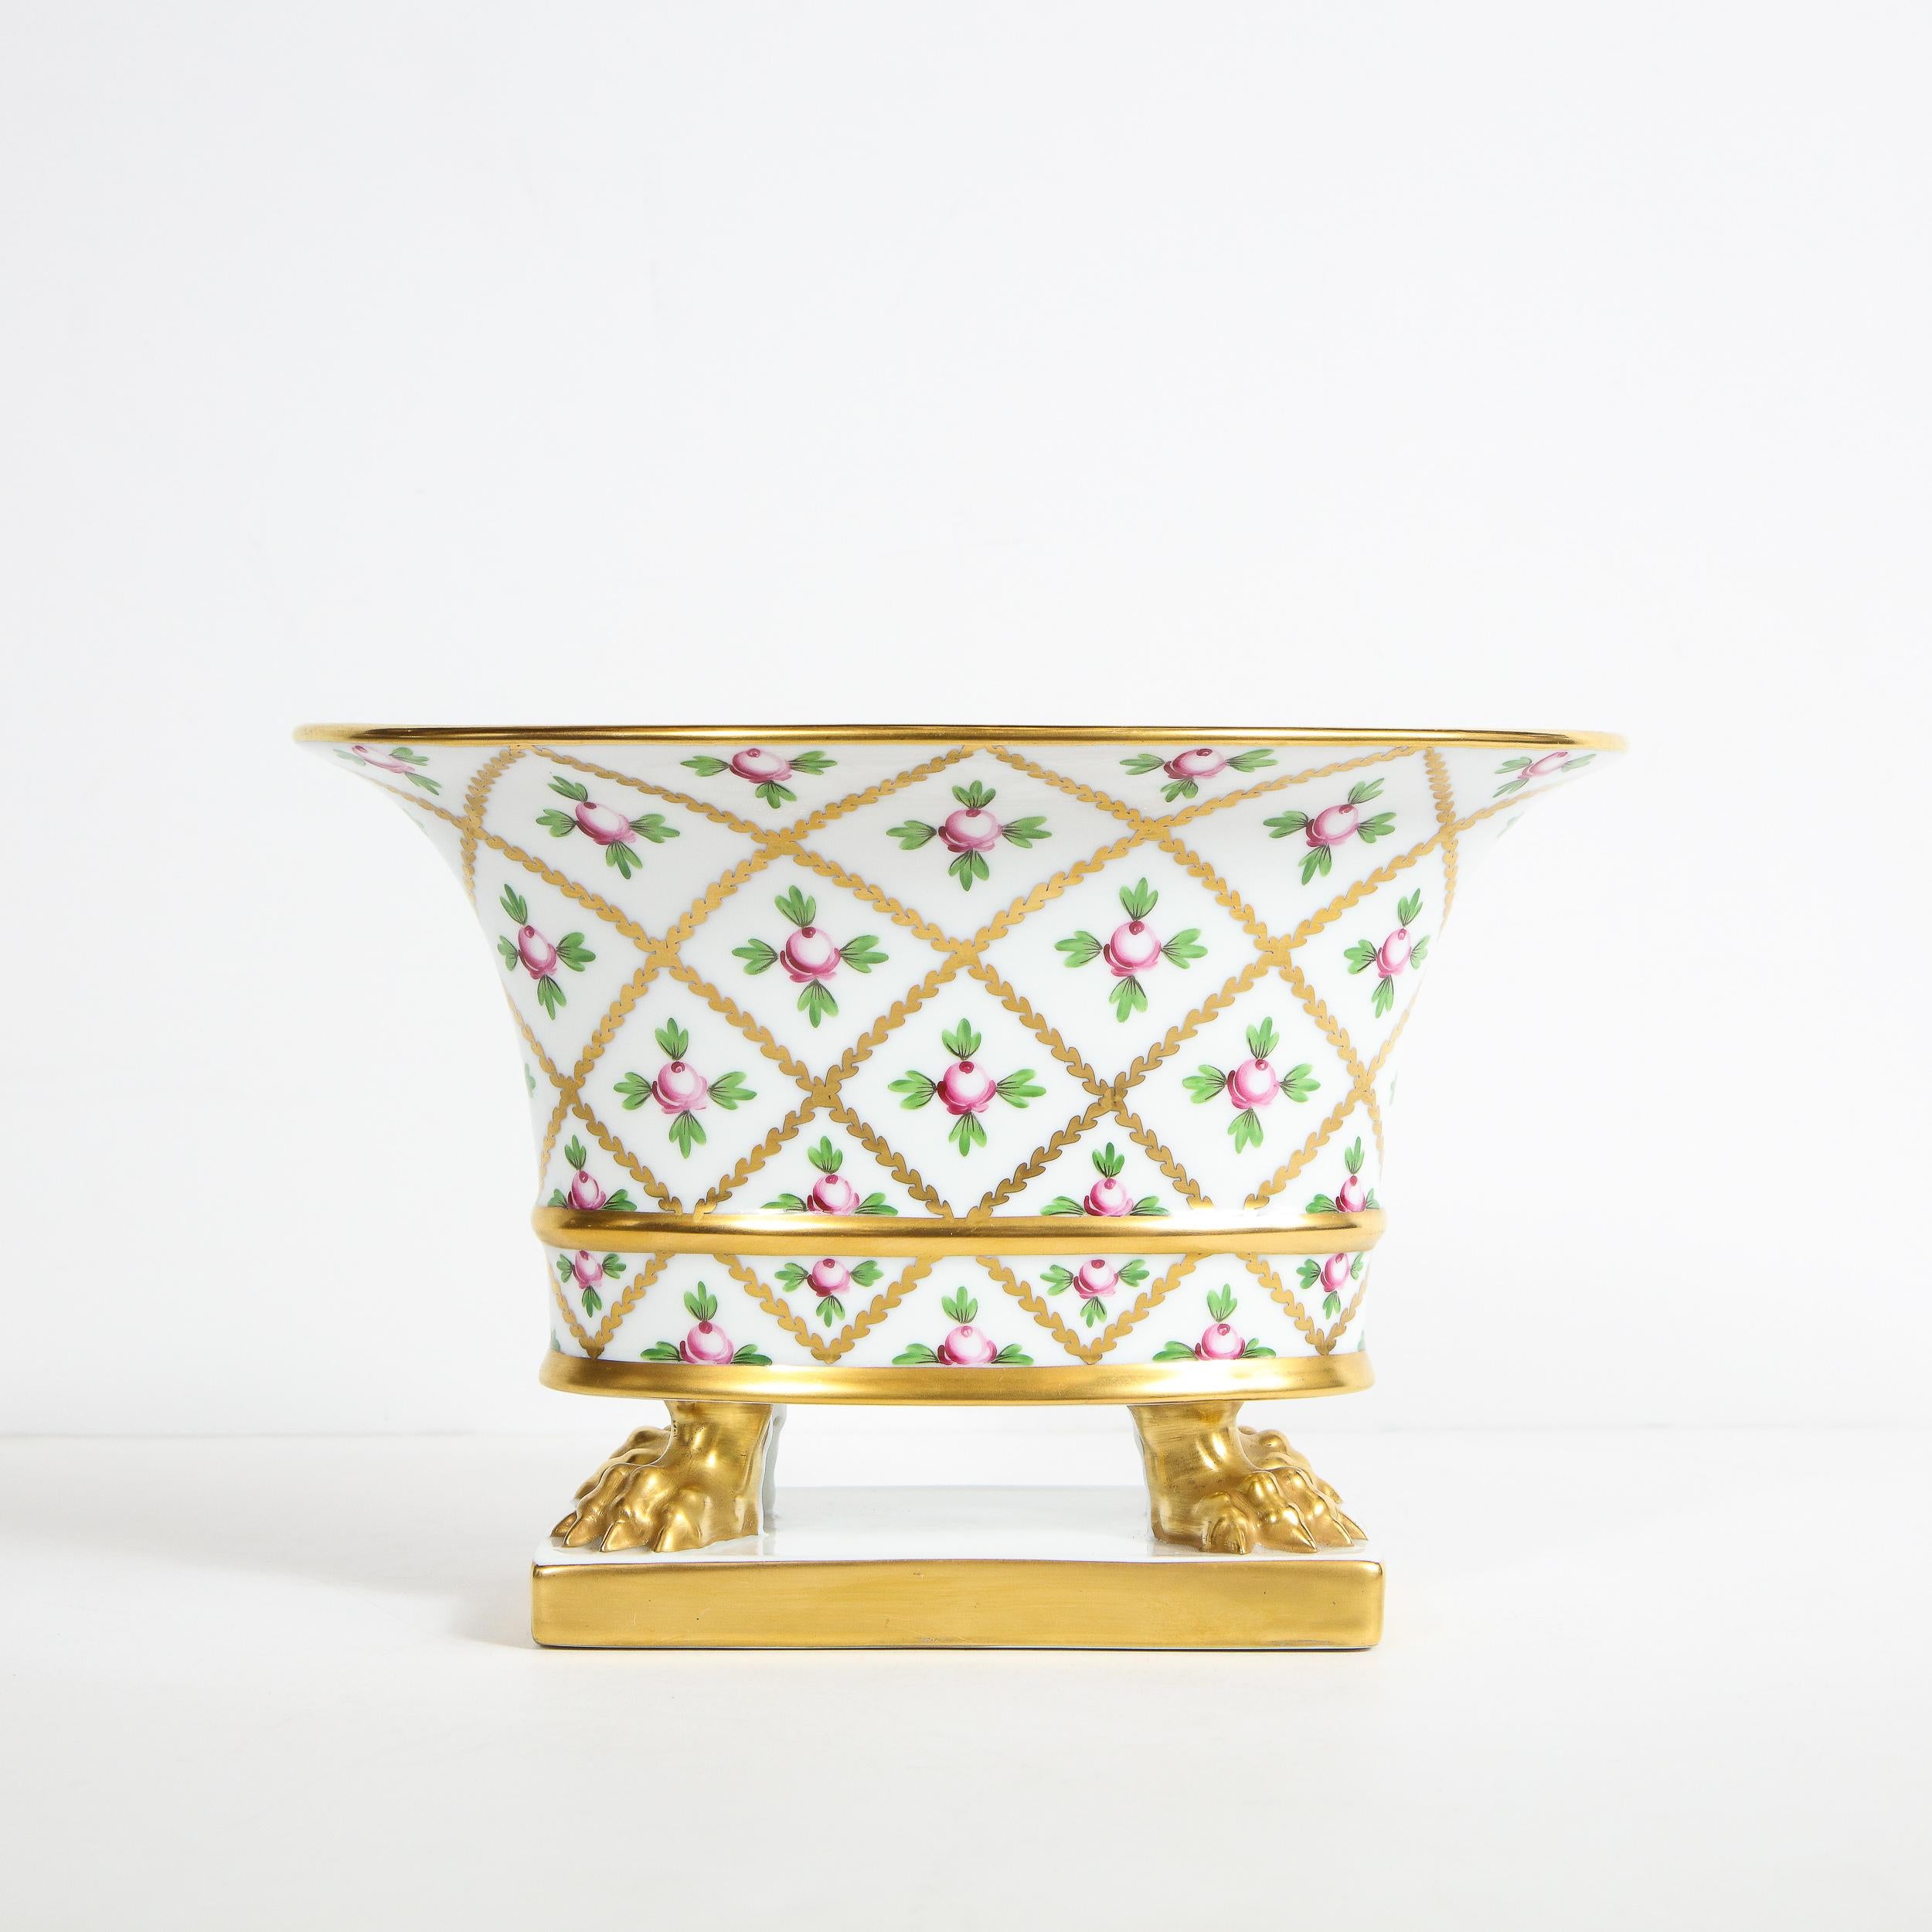 This elegant neoclassical cachepot was realized by the esteemed maker Herend of Hungary. It features stylized 24kt yellow gold hand painted clawfeet on a white porcelain based circumscribed in yellow gold. The piece offers a elliptic form that